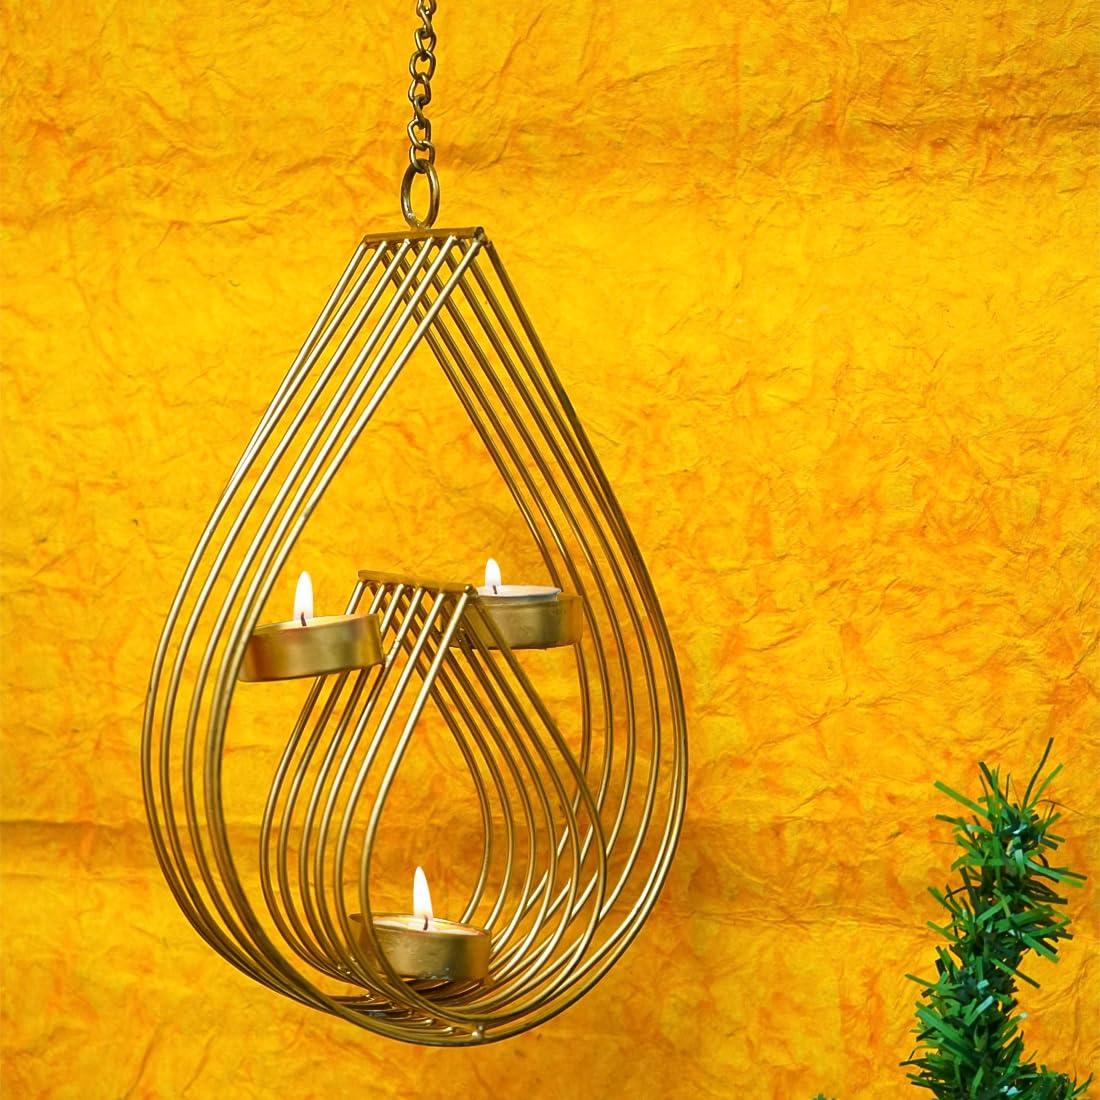 Ekhasa Hanging Tealight Candle Holder for Home Decor | Perfect Candle Holder for Diwali Decoration and Wall Hanging Decor | Indoor & Outdoor, Festival Decorative Candles Gift Items (Gold Diya)